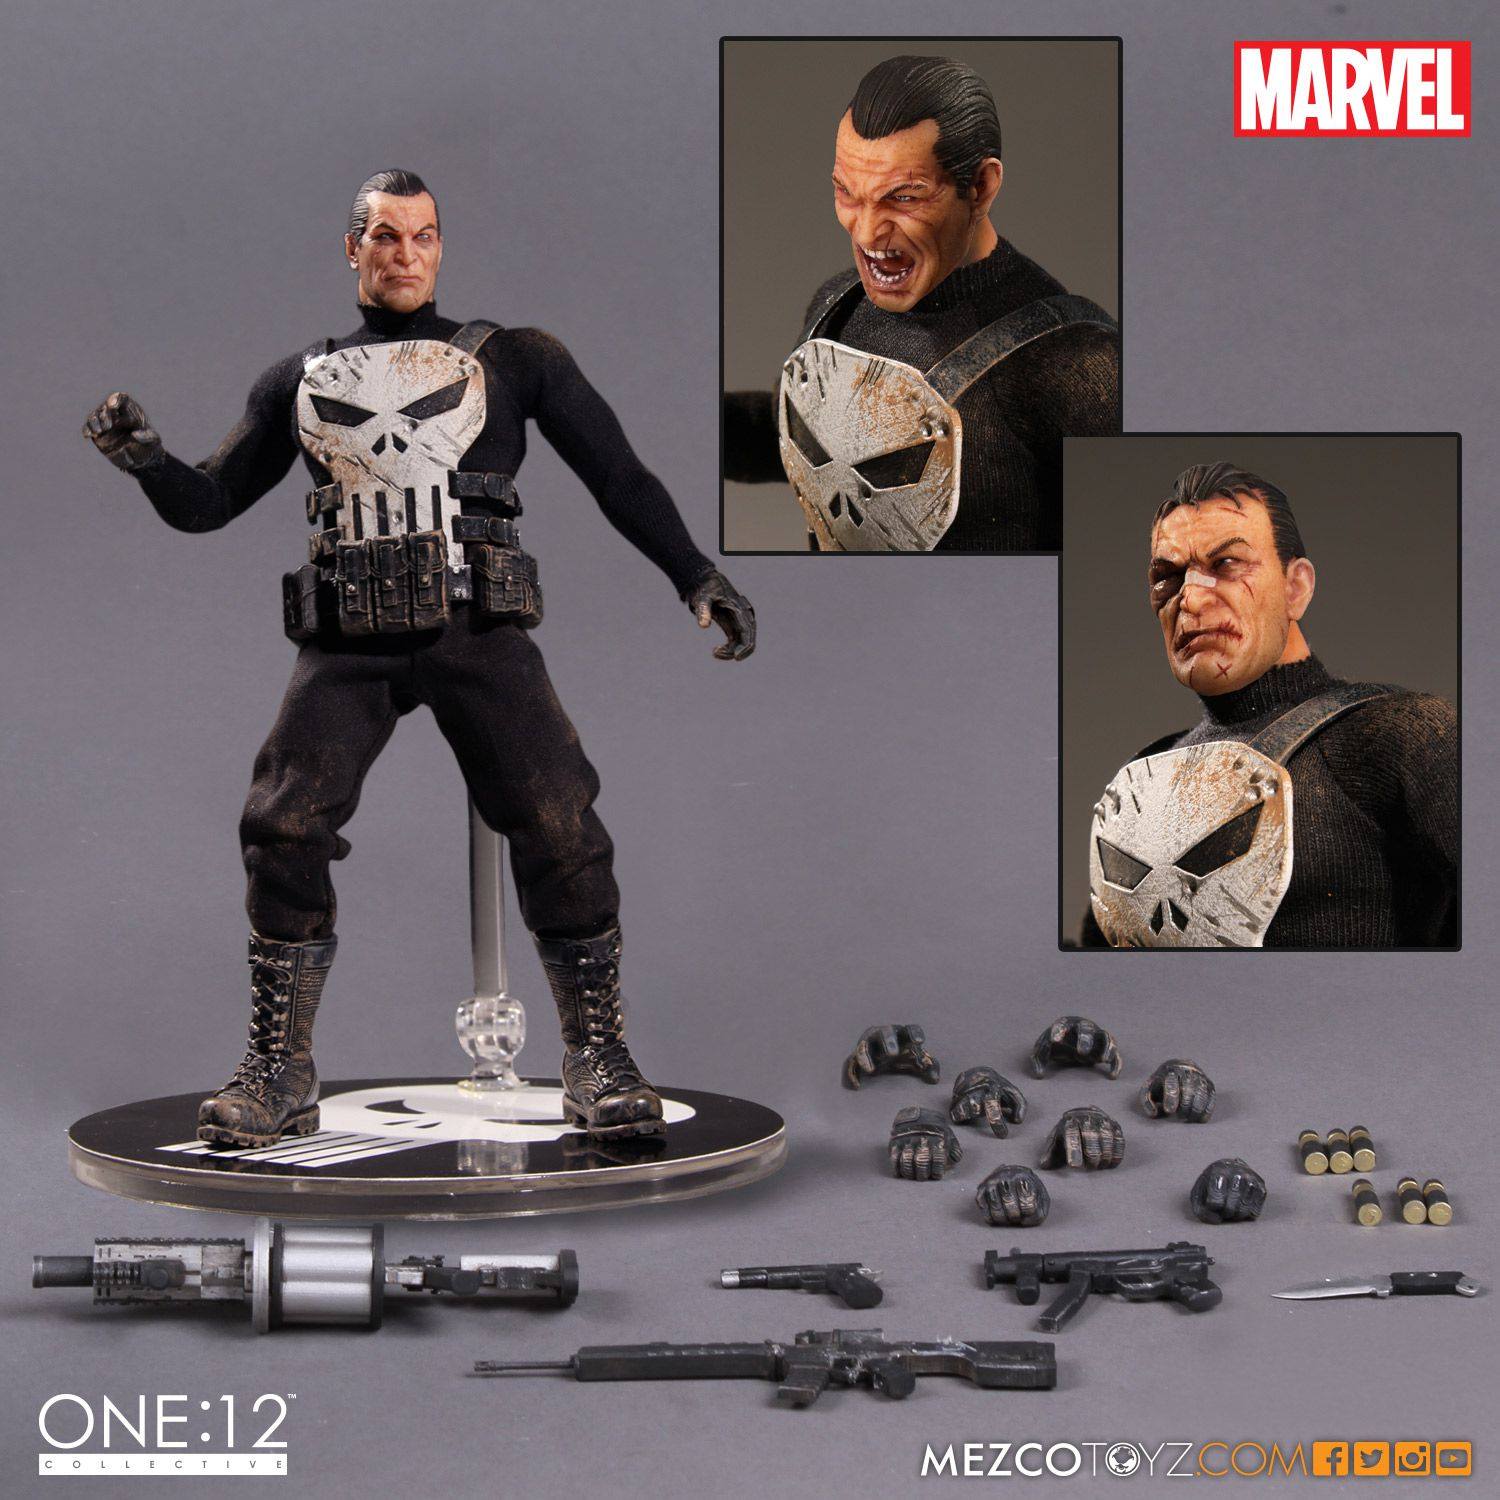 toyhaven: Check out the MEZCO Toys One:12 Collective Frank Castle ...